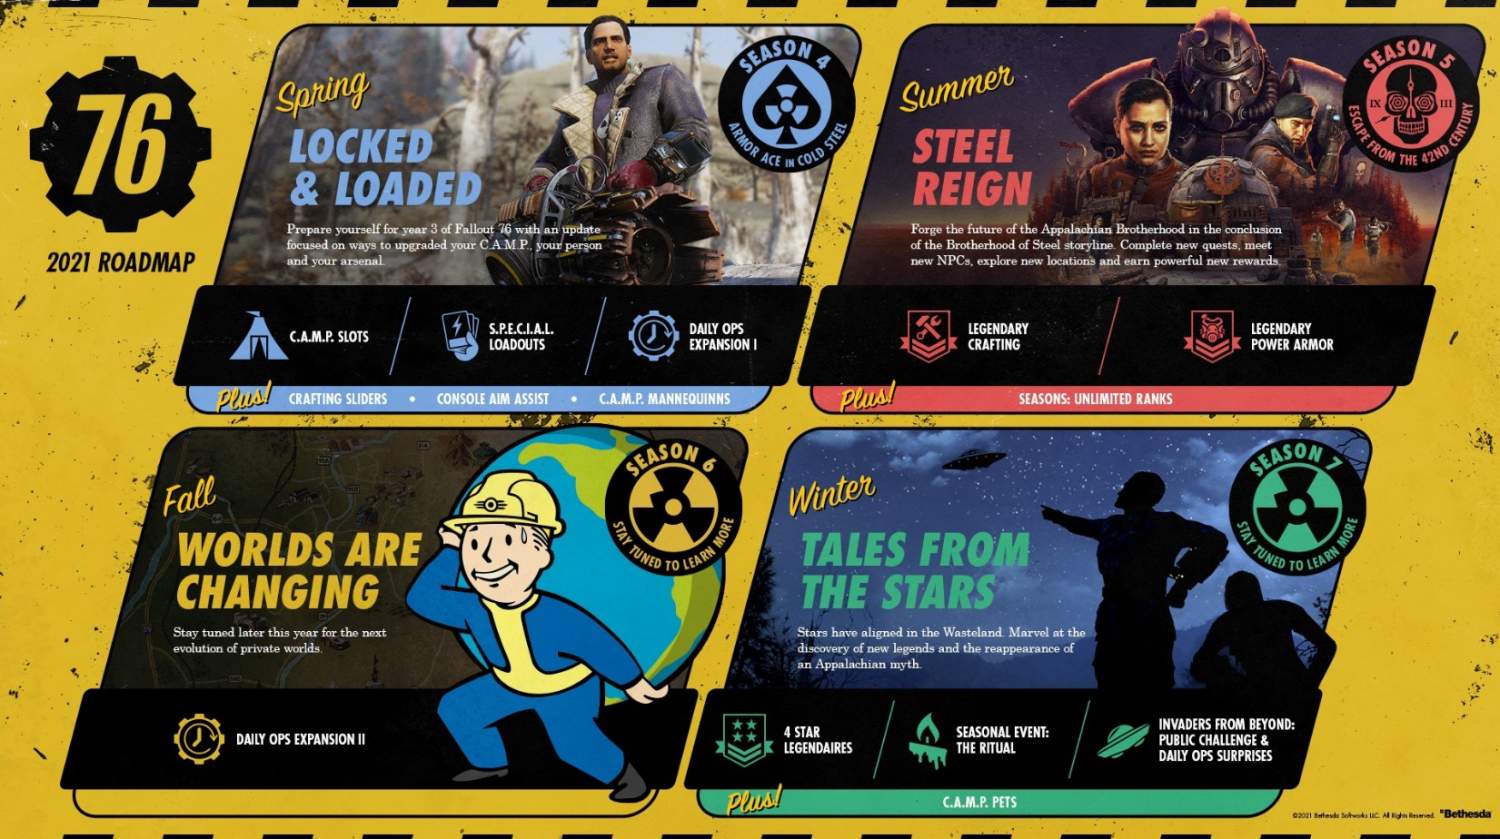 Fallout 76 2021 roadmap detailed with new seasons, items, and events